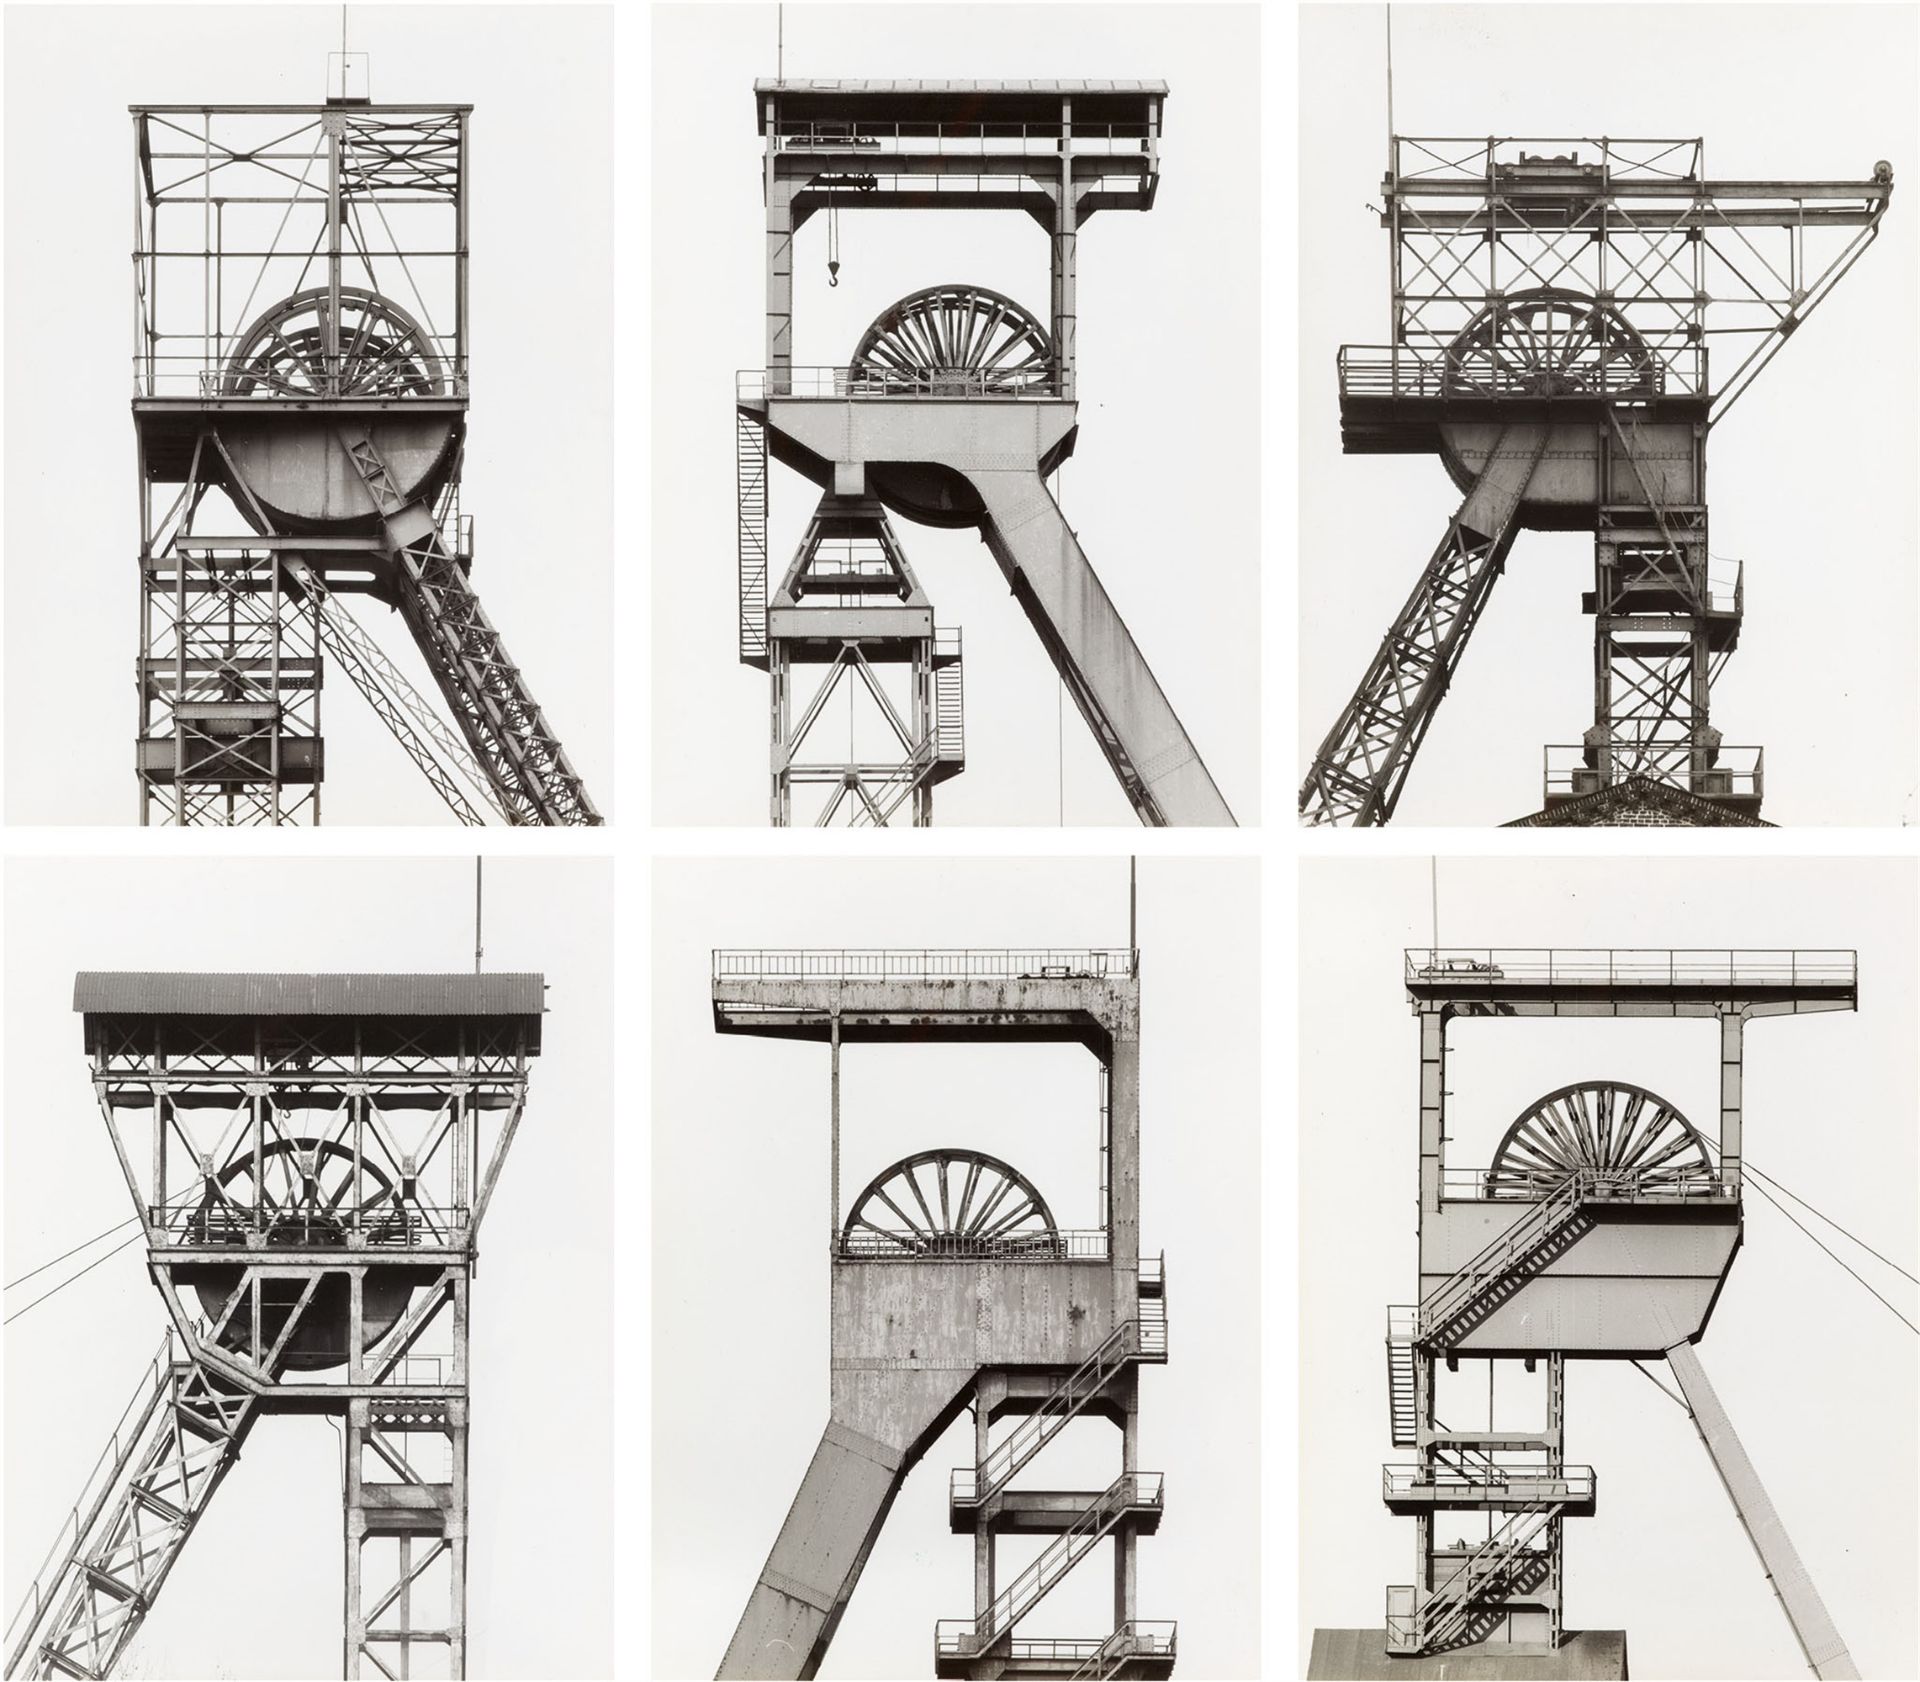 Bernd and Hilla Becher, Winding towers - Image 8 of 14